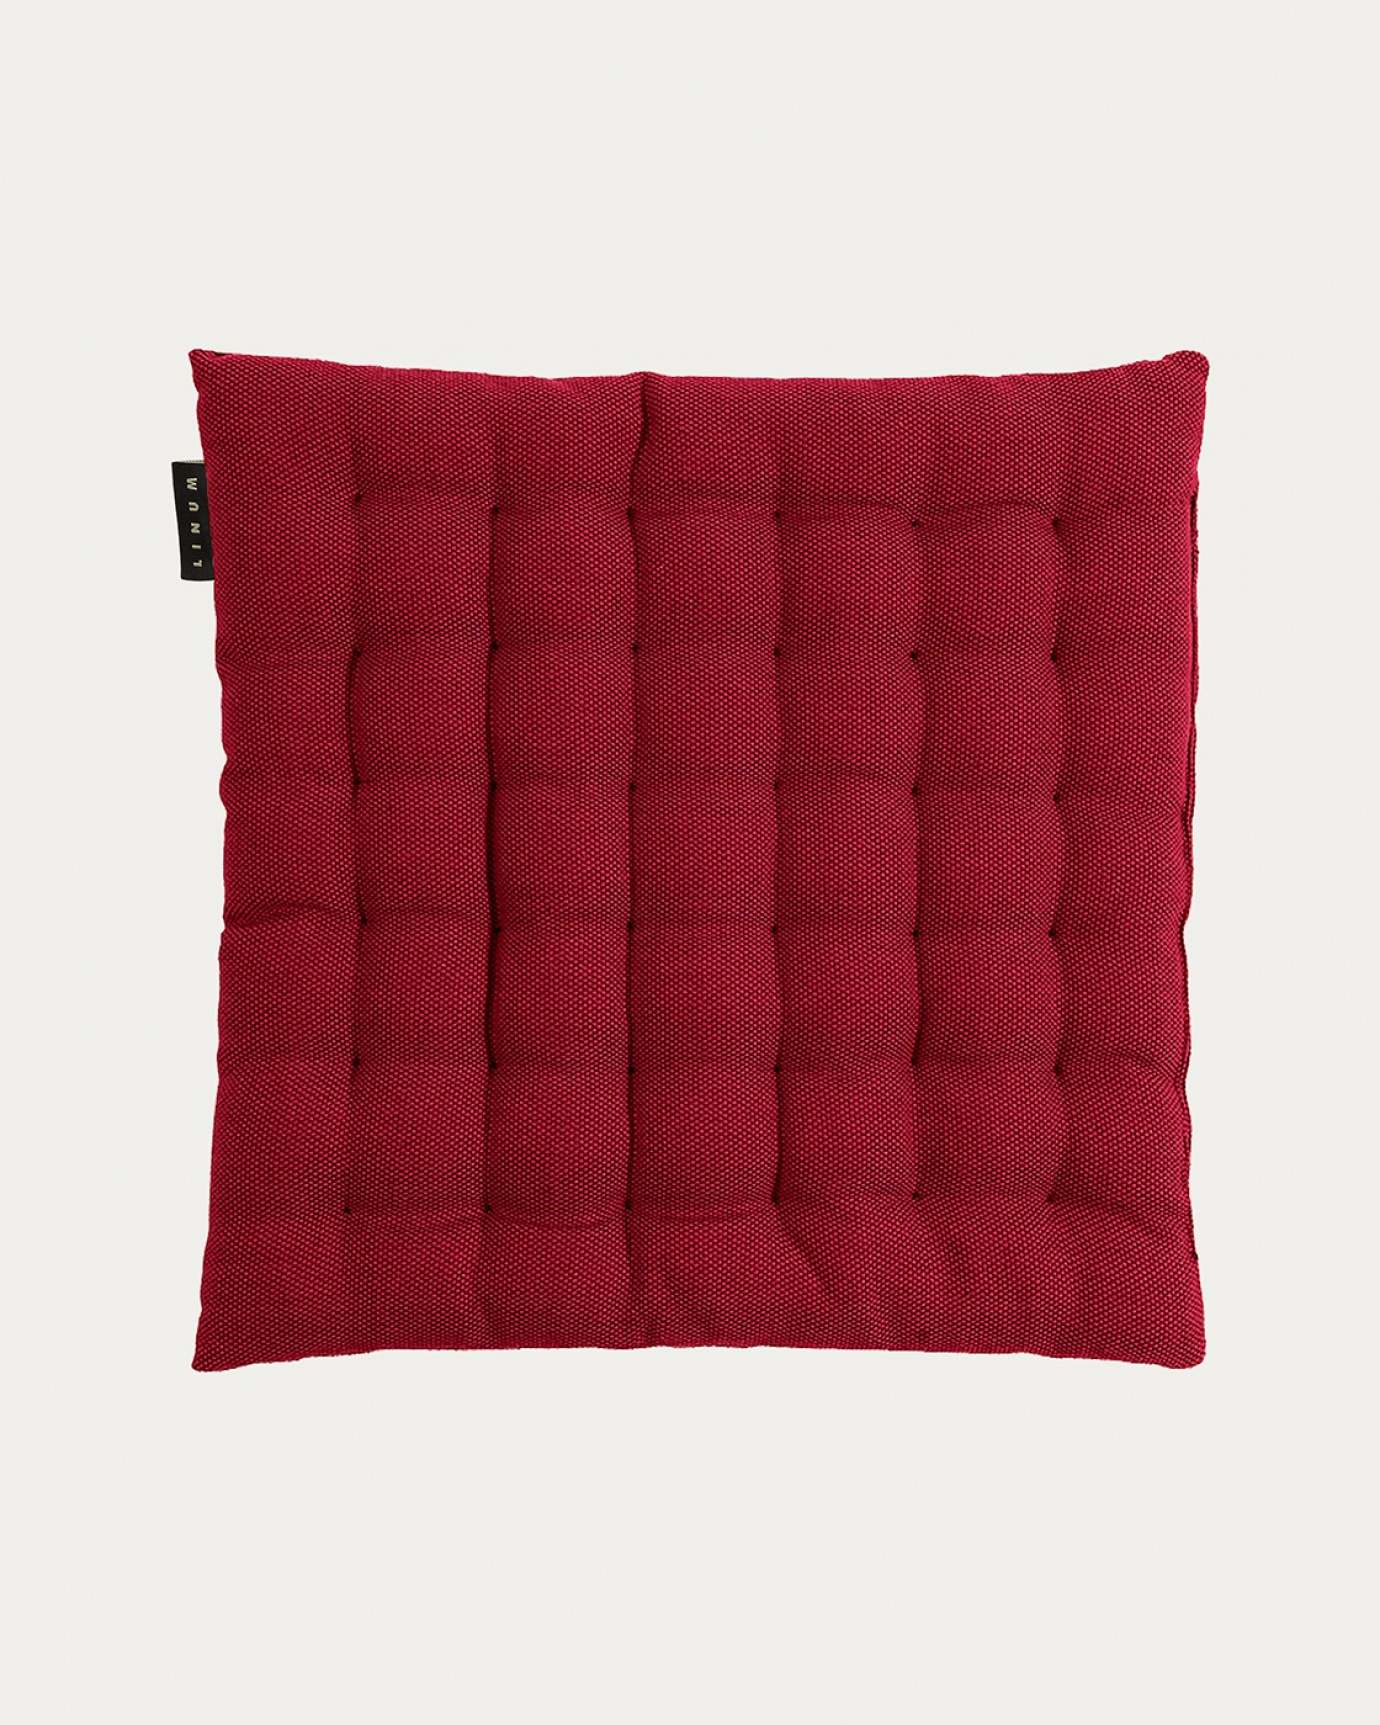 Product image red PEPPER seat cushion made of soft cotton with recycled polyester filling from LINUM DESIGN. Size 40x40 cm.